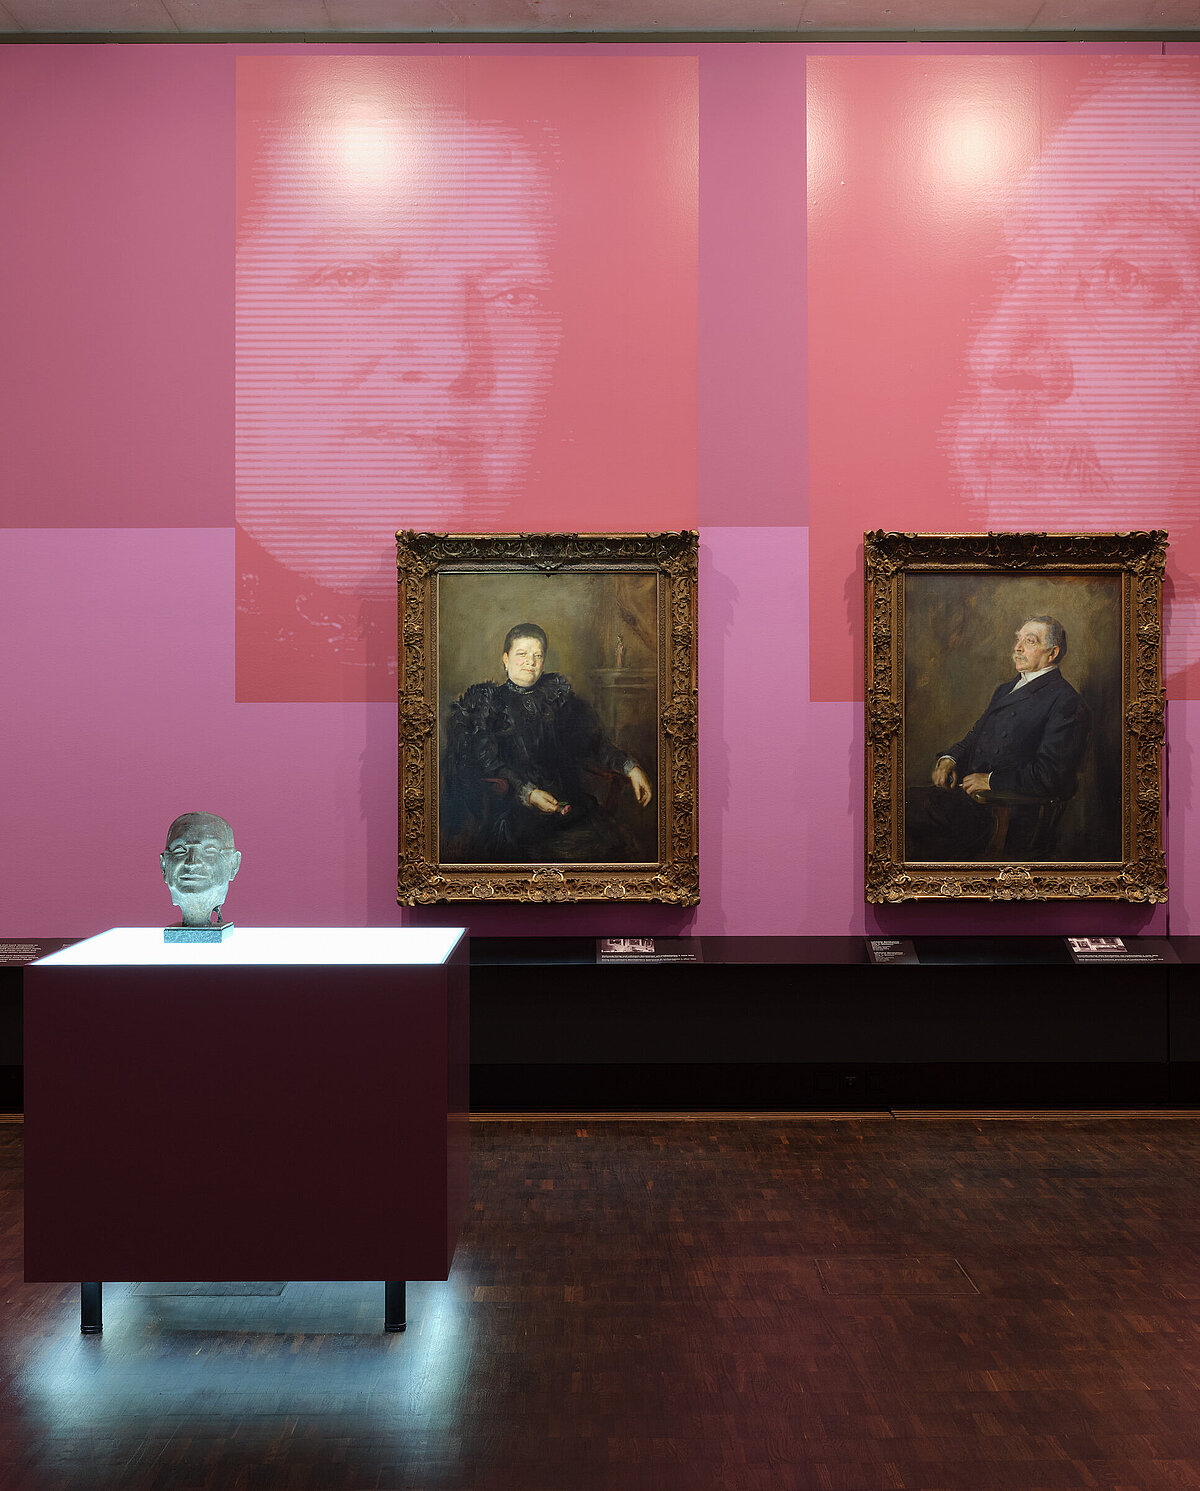 Exhibition view "Picture Stories", portraits of Fanny and Lehmann Bernheimer hanging on a rose-colored wall, in front of them the bust of Otto Bernheimer on an illuminated display case, Photo: Eva Jünger / Jewish Museum Munich